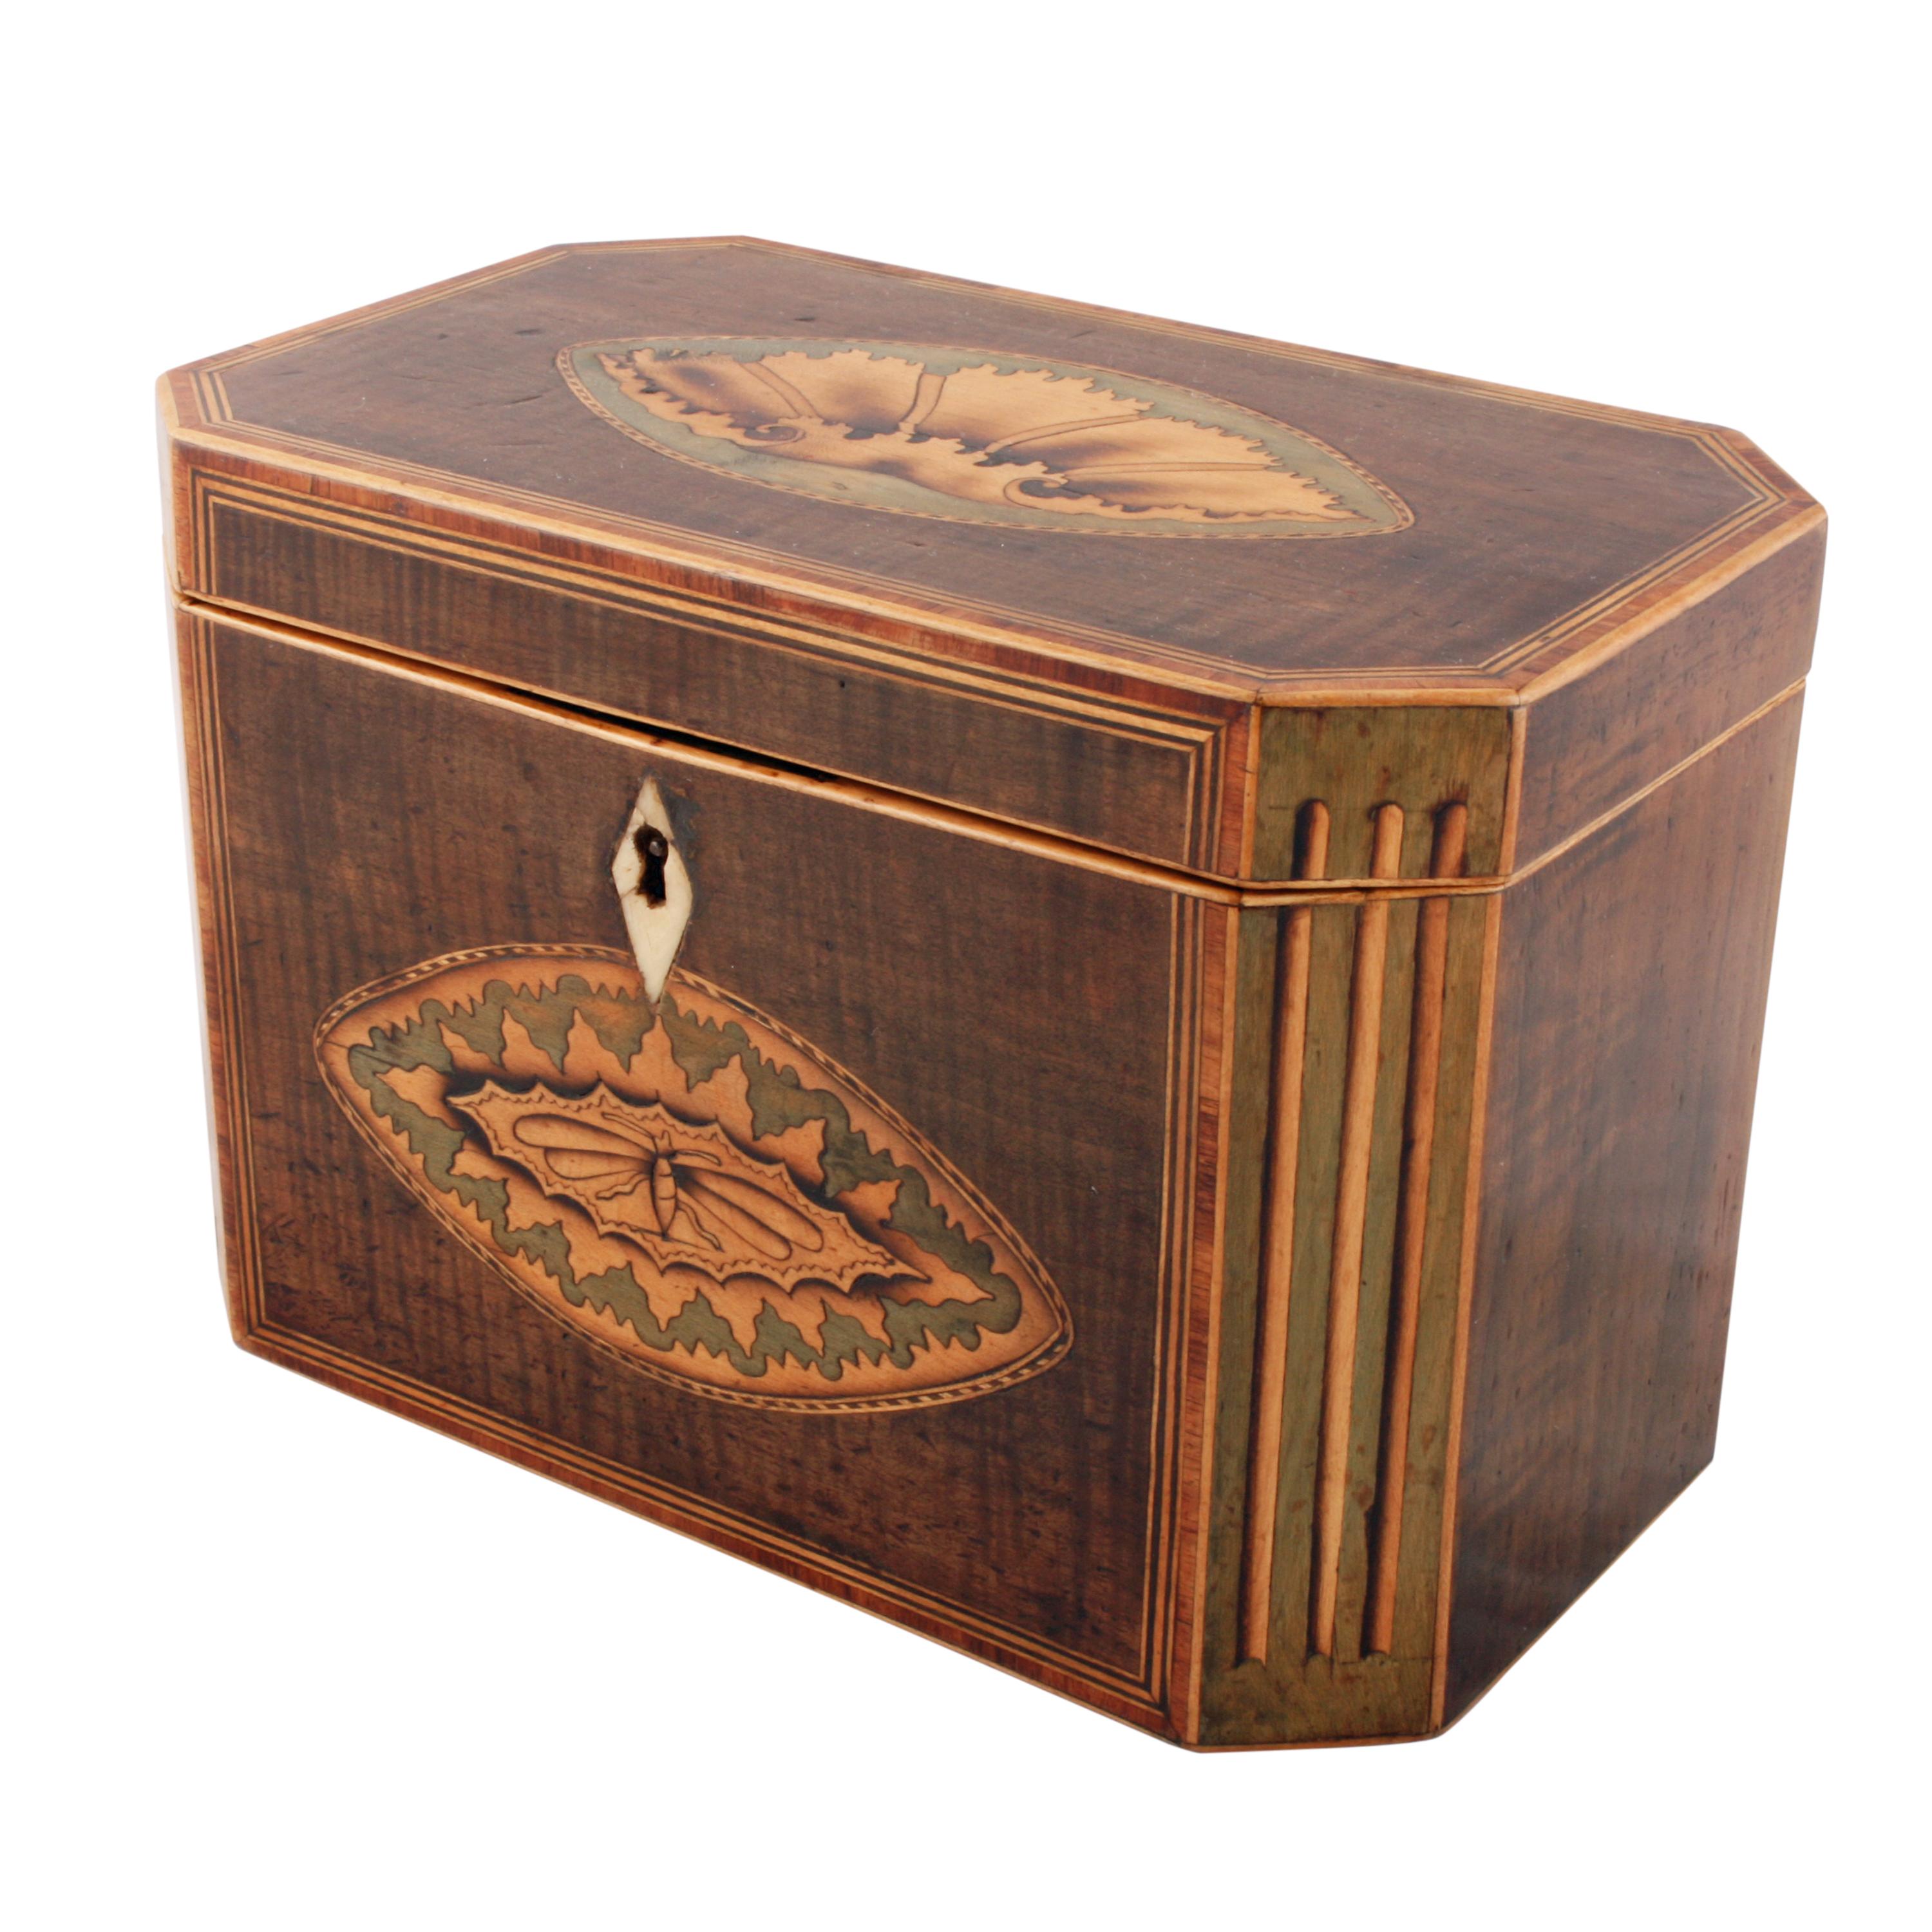 

18th century sheraton tea caddy


An 18th century Georgian Sheraton design mahogany inlaid tea caddy.

The caddy is veneered with fiddleback mahogany, has box wood edges with many inlays and cross banding.

The lid has a large oval shell